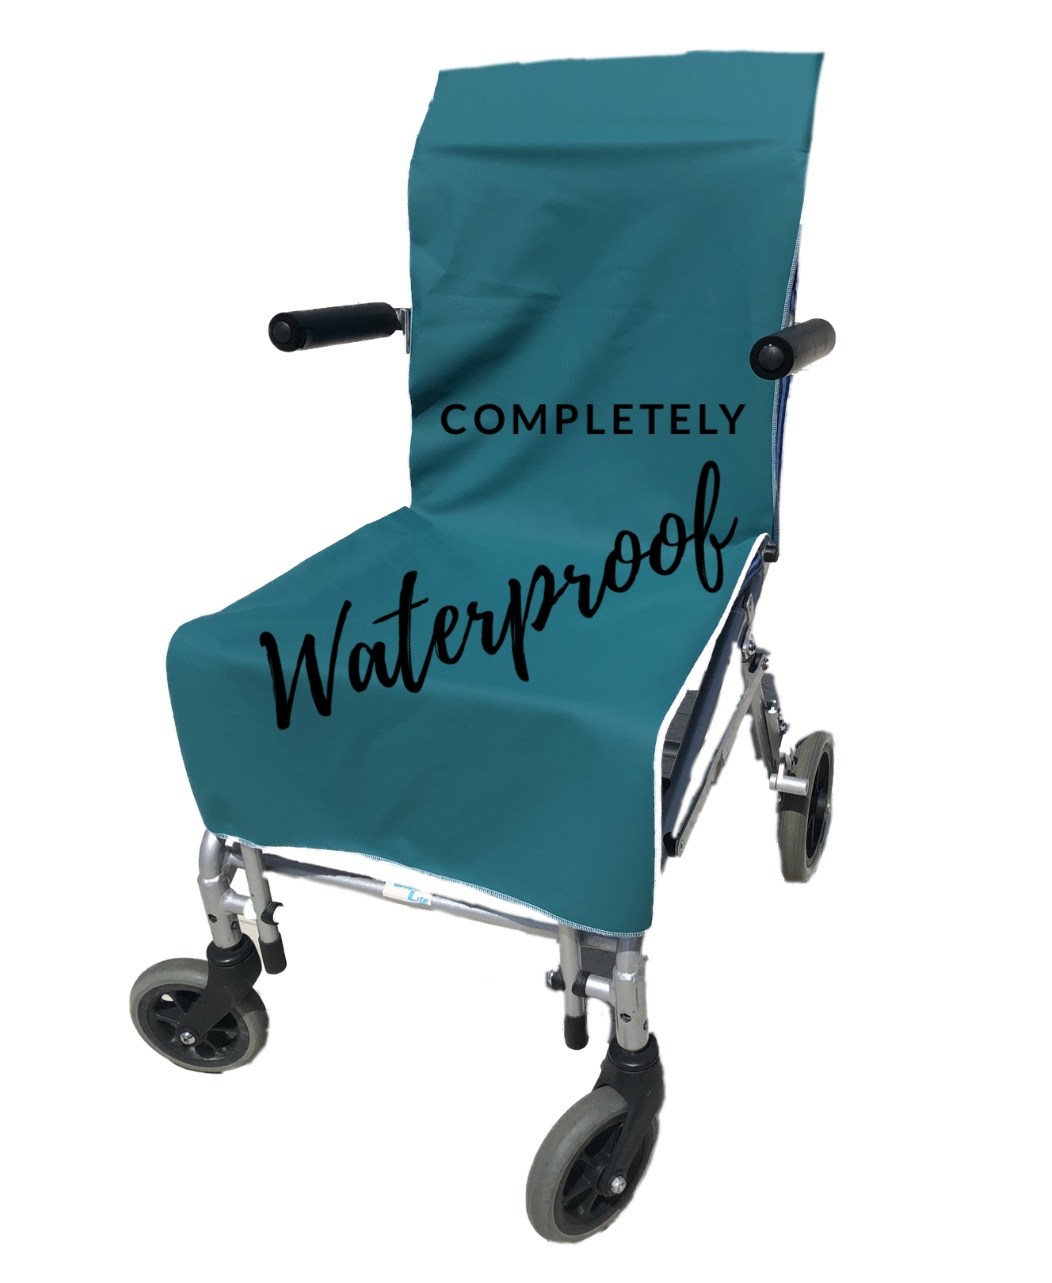 https://www.special-need-products.com/images/Wheelchair-seat-covers-cover-entire-seat-waterproof-PWAff2.jpeg